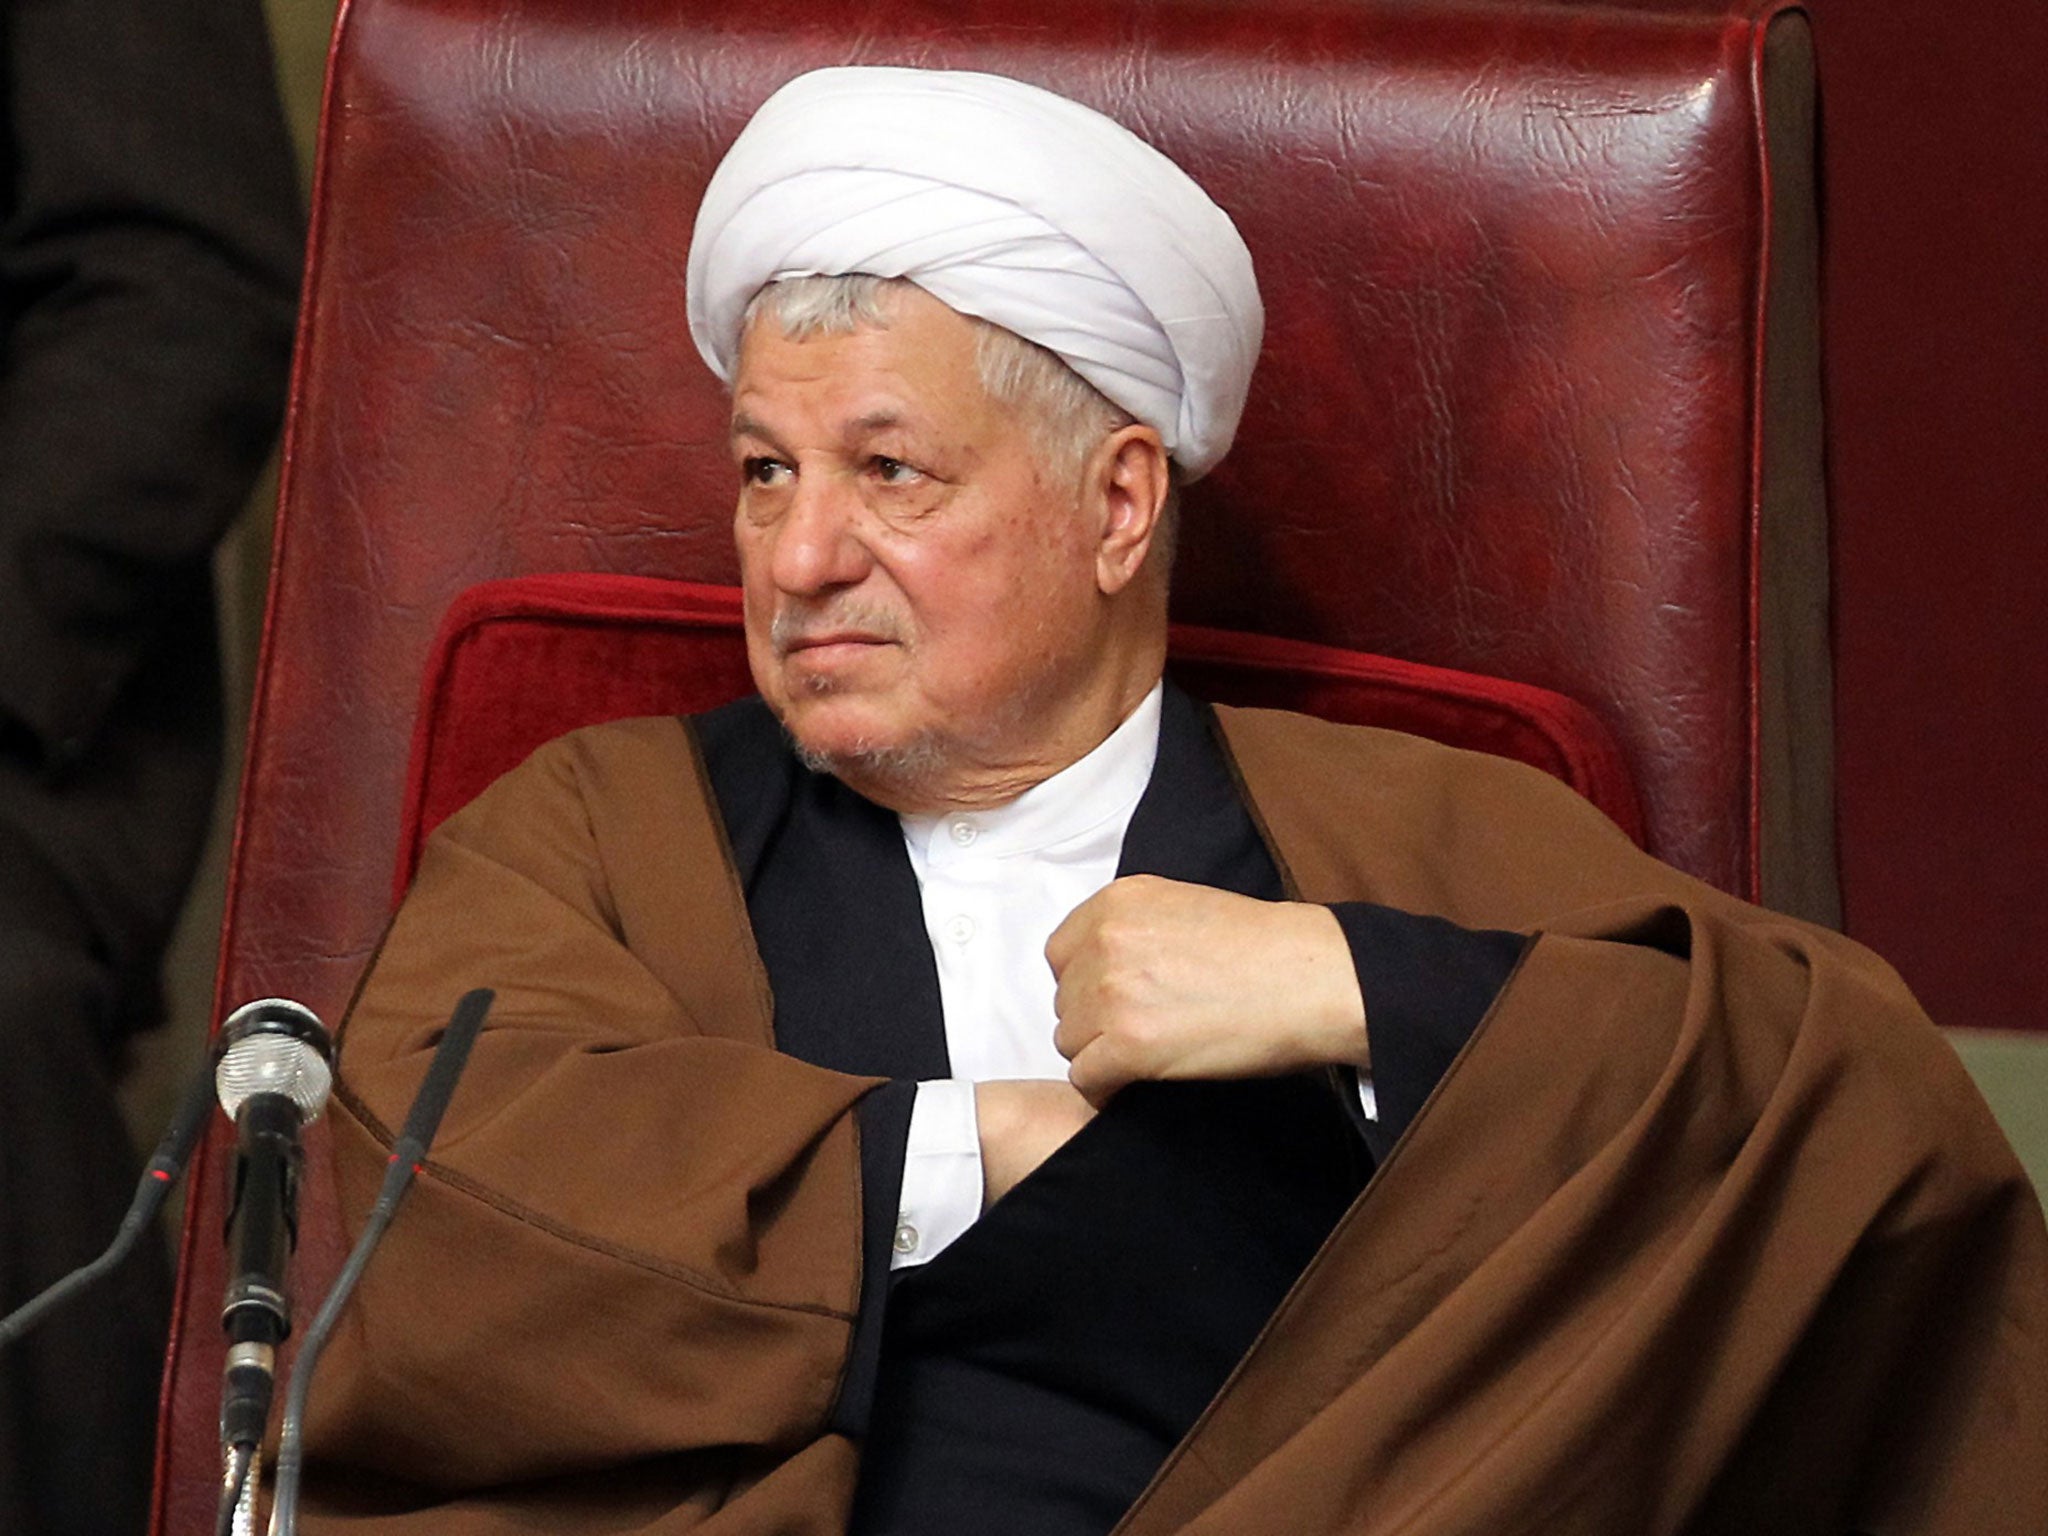 File photo taken on 8 March, 2011 shows former Iranian President Akbar Hashemi Rafsanjani, attending a meeting of the top clerical body in Tehran